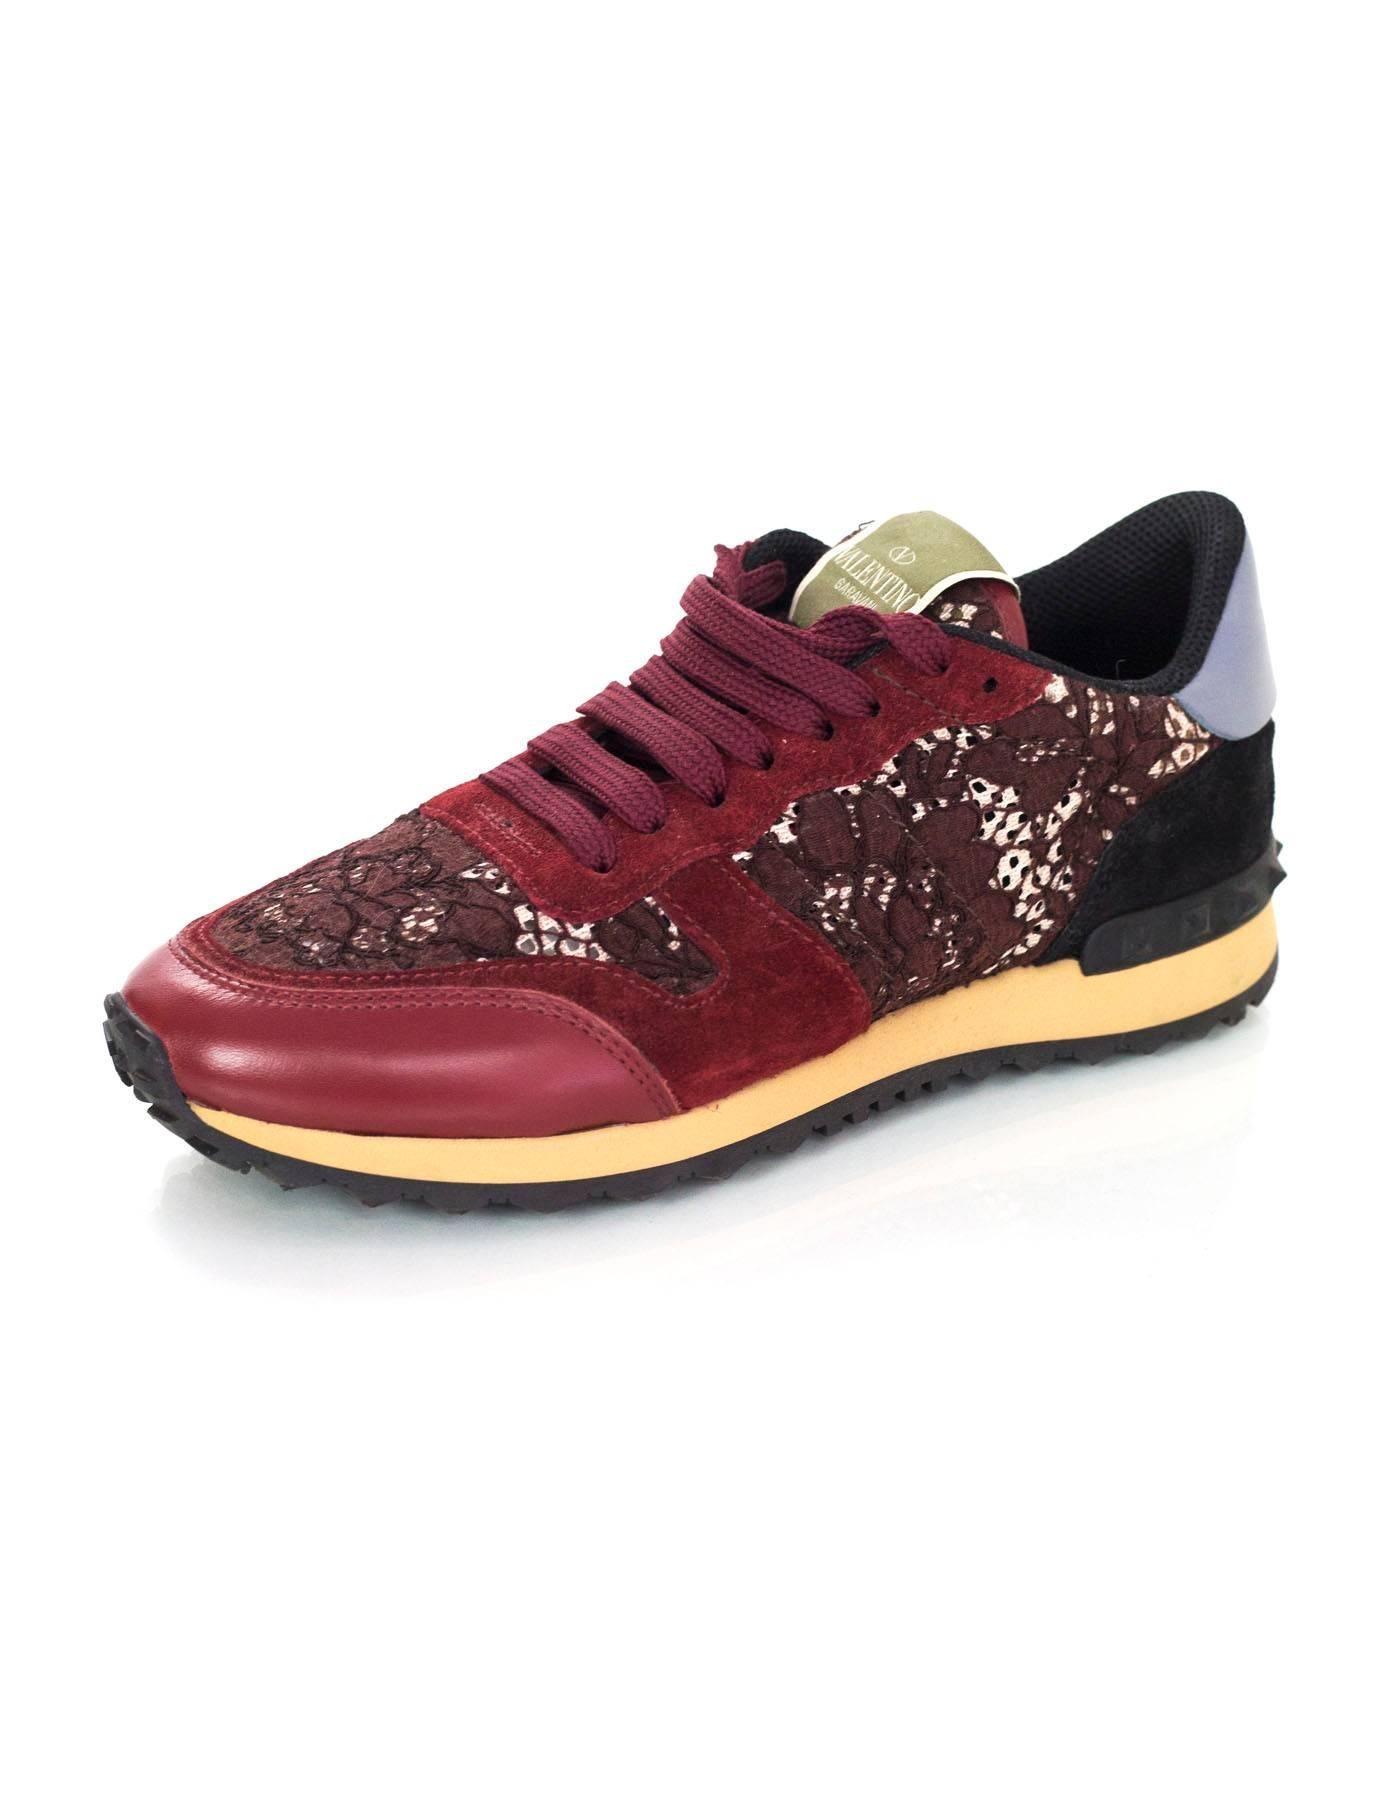 Valentino Burgundy Suede & Lace Rockrunner Sneakers Sz 38.5

Made In: Italy
Color: Burgundy
Materials: Leather, suede, lace, rubber
Closure/Opening: Lace tie closure
Sole Stamp: Valentino Garavani Made in Italy
Retail Price: $745 + tax
Overall